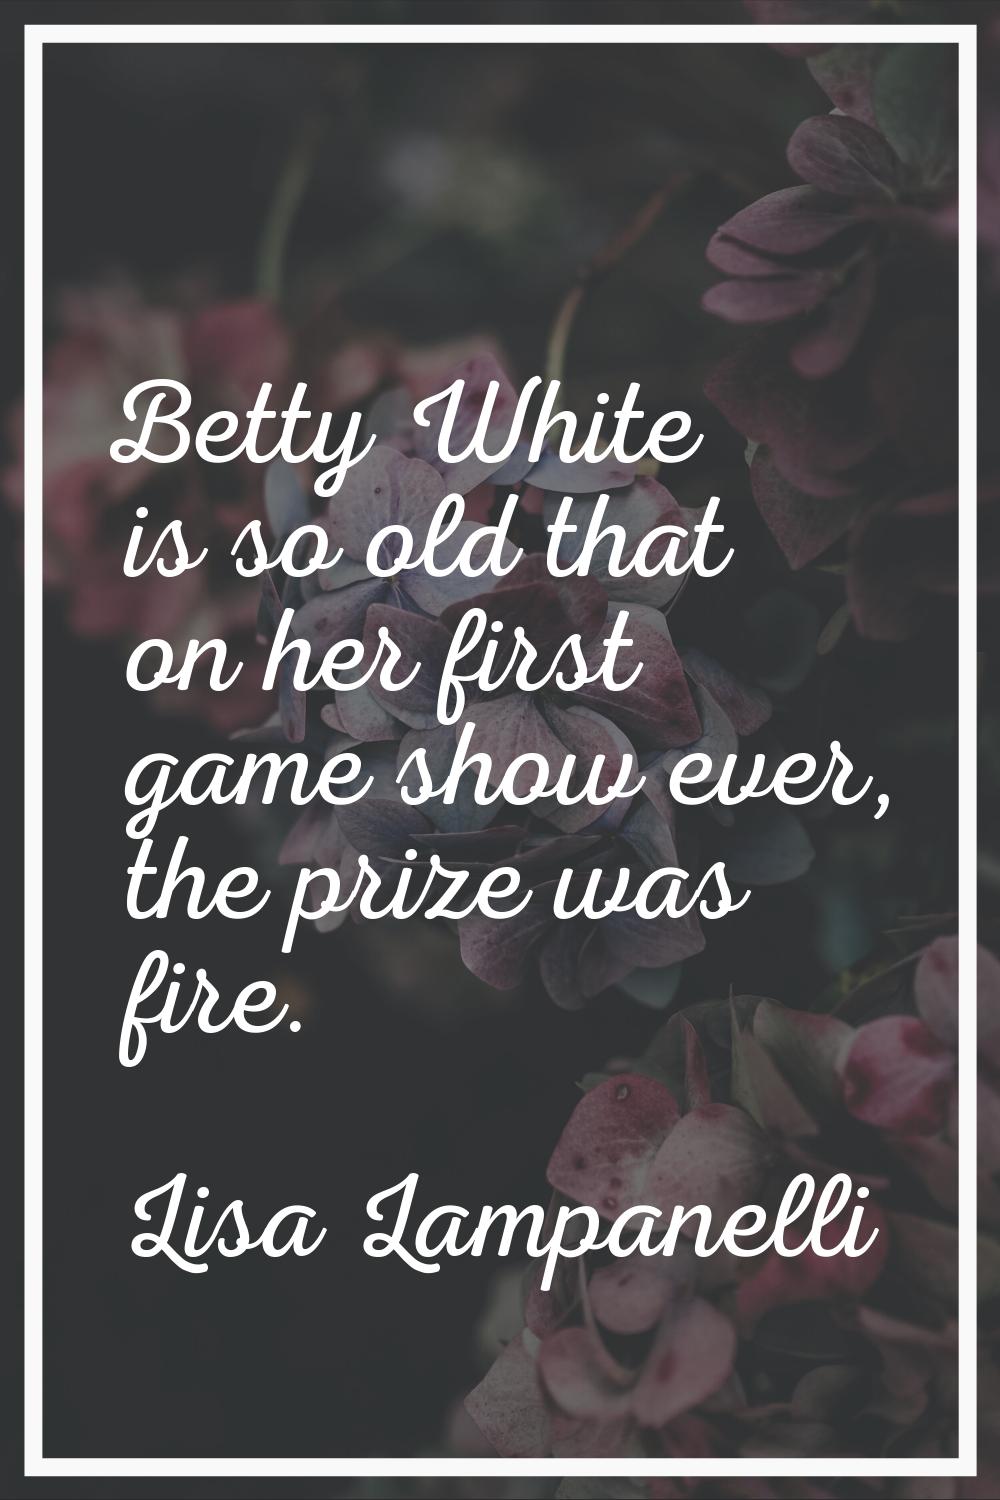 Betty White is so old that on her first game show ever, the prize was fire.